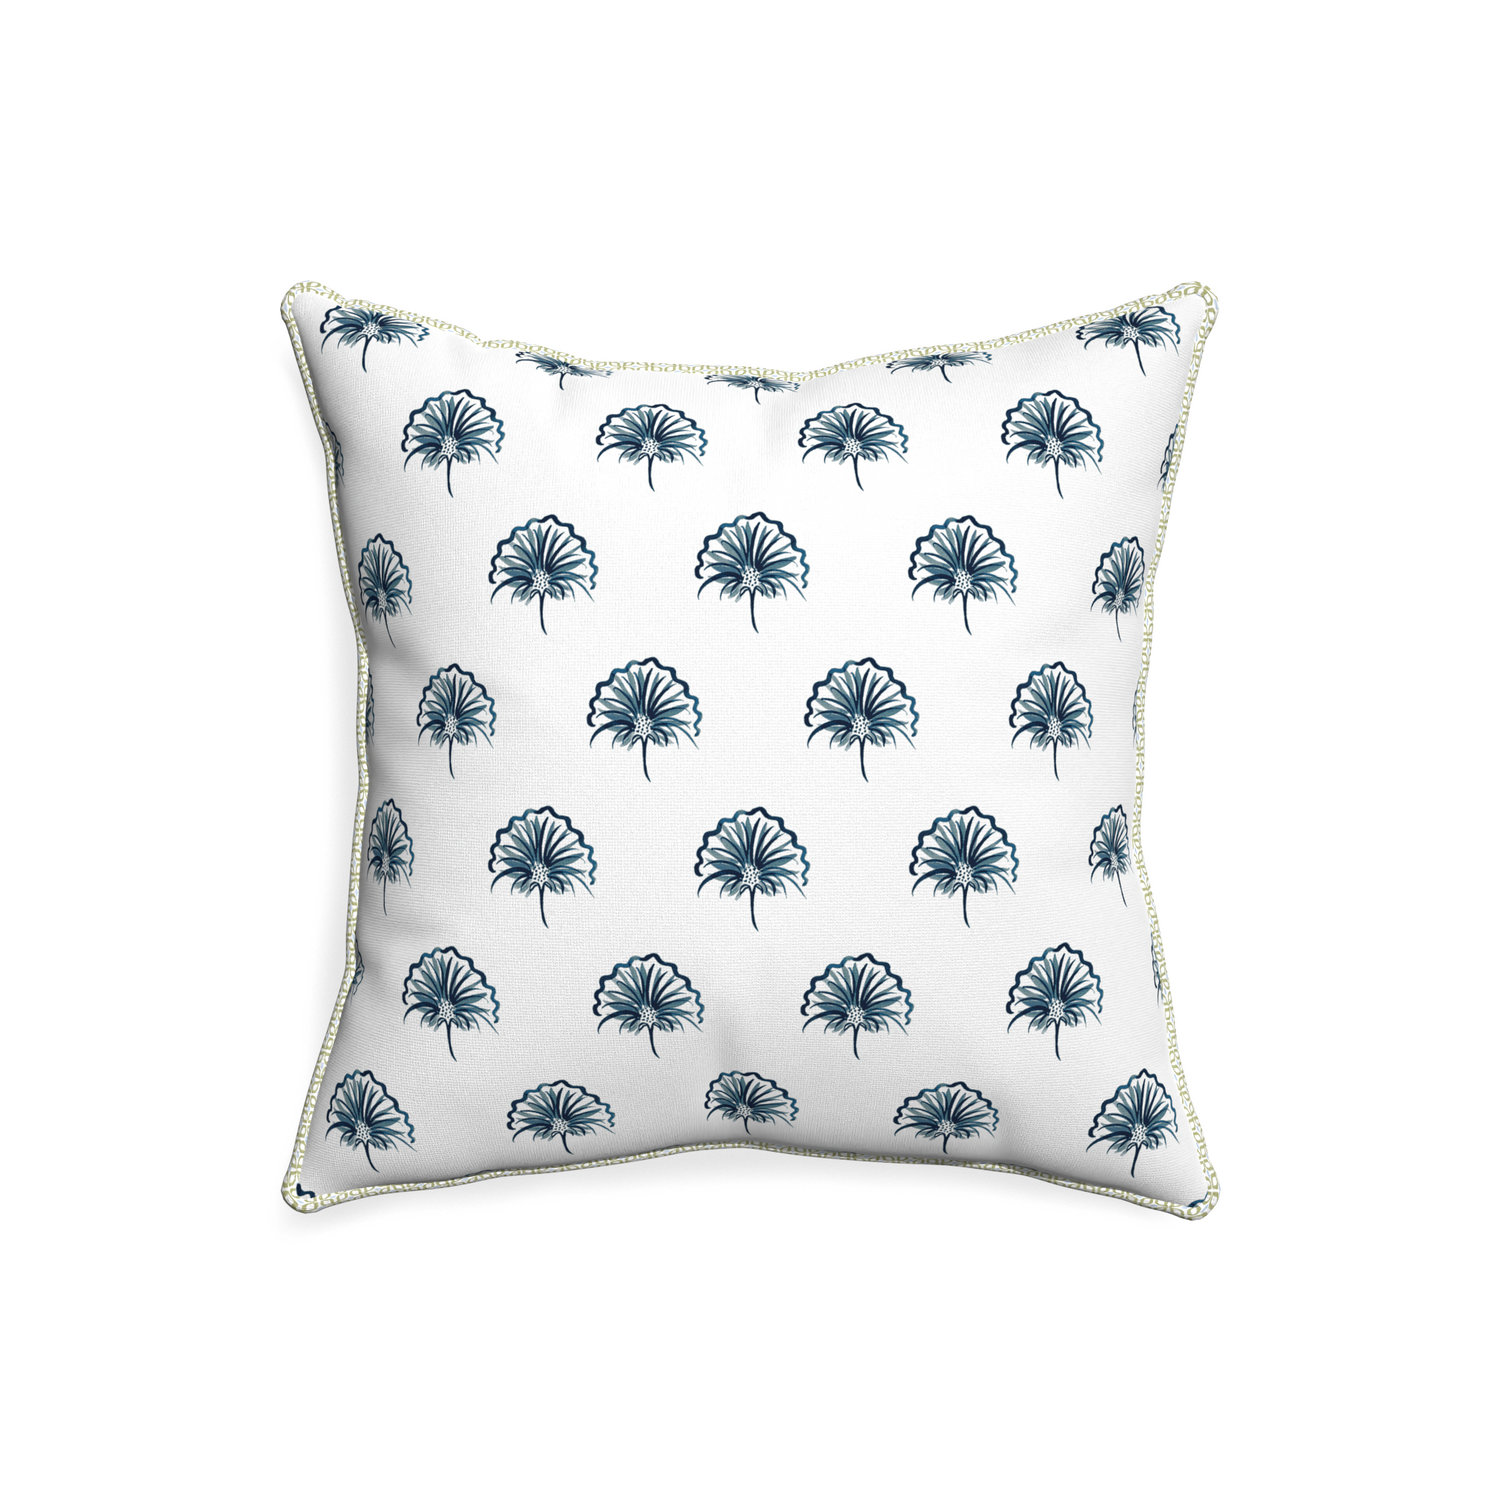 20-square penelope midnight custom floral navypillow with l piping on white background